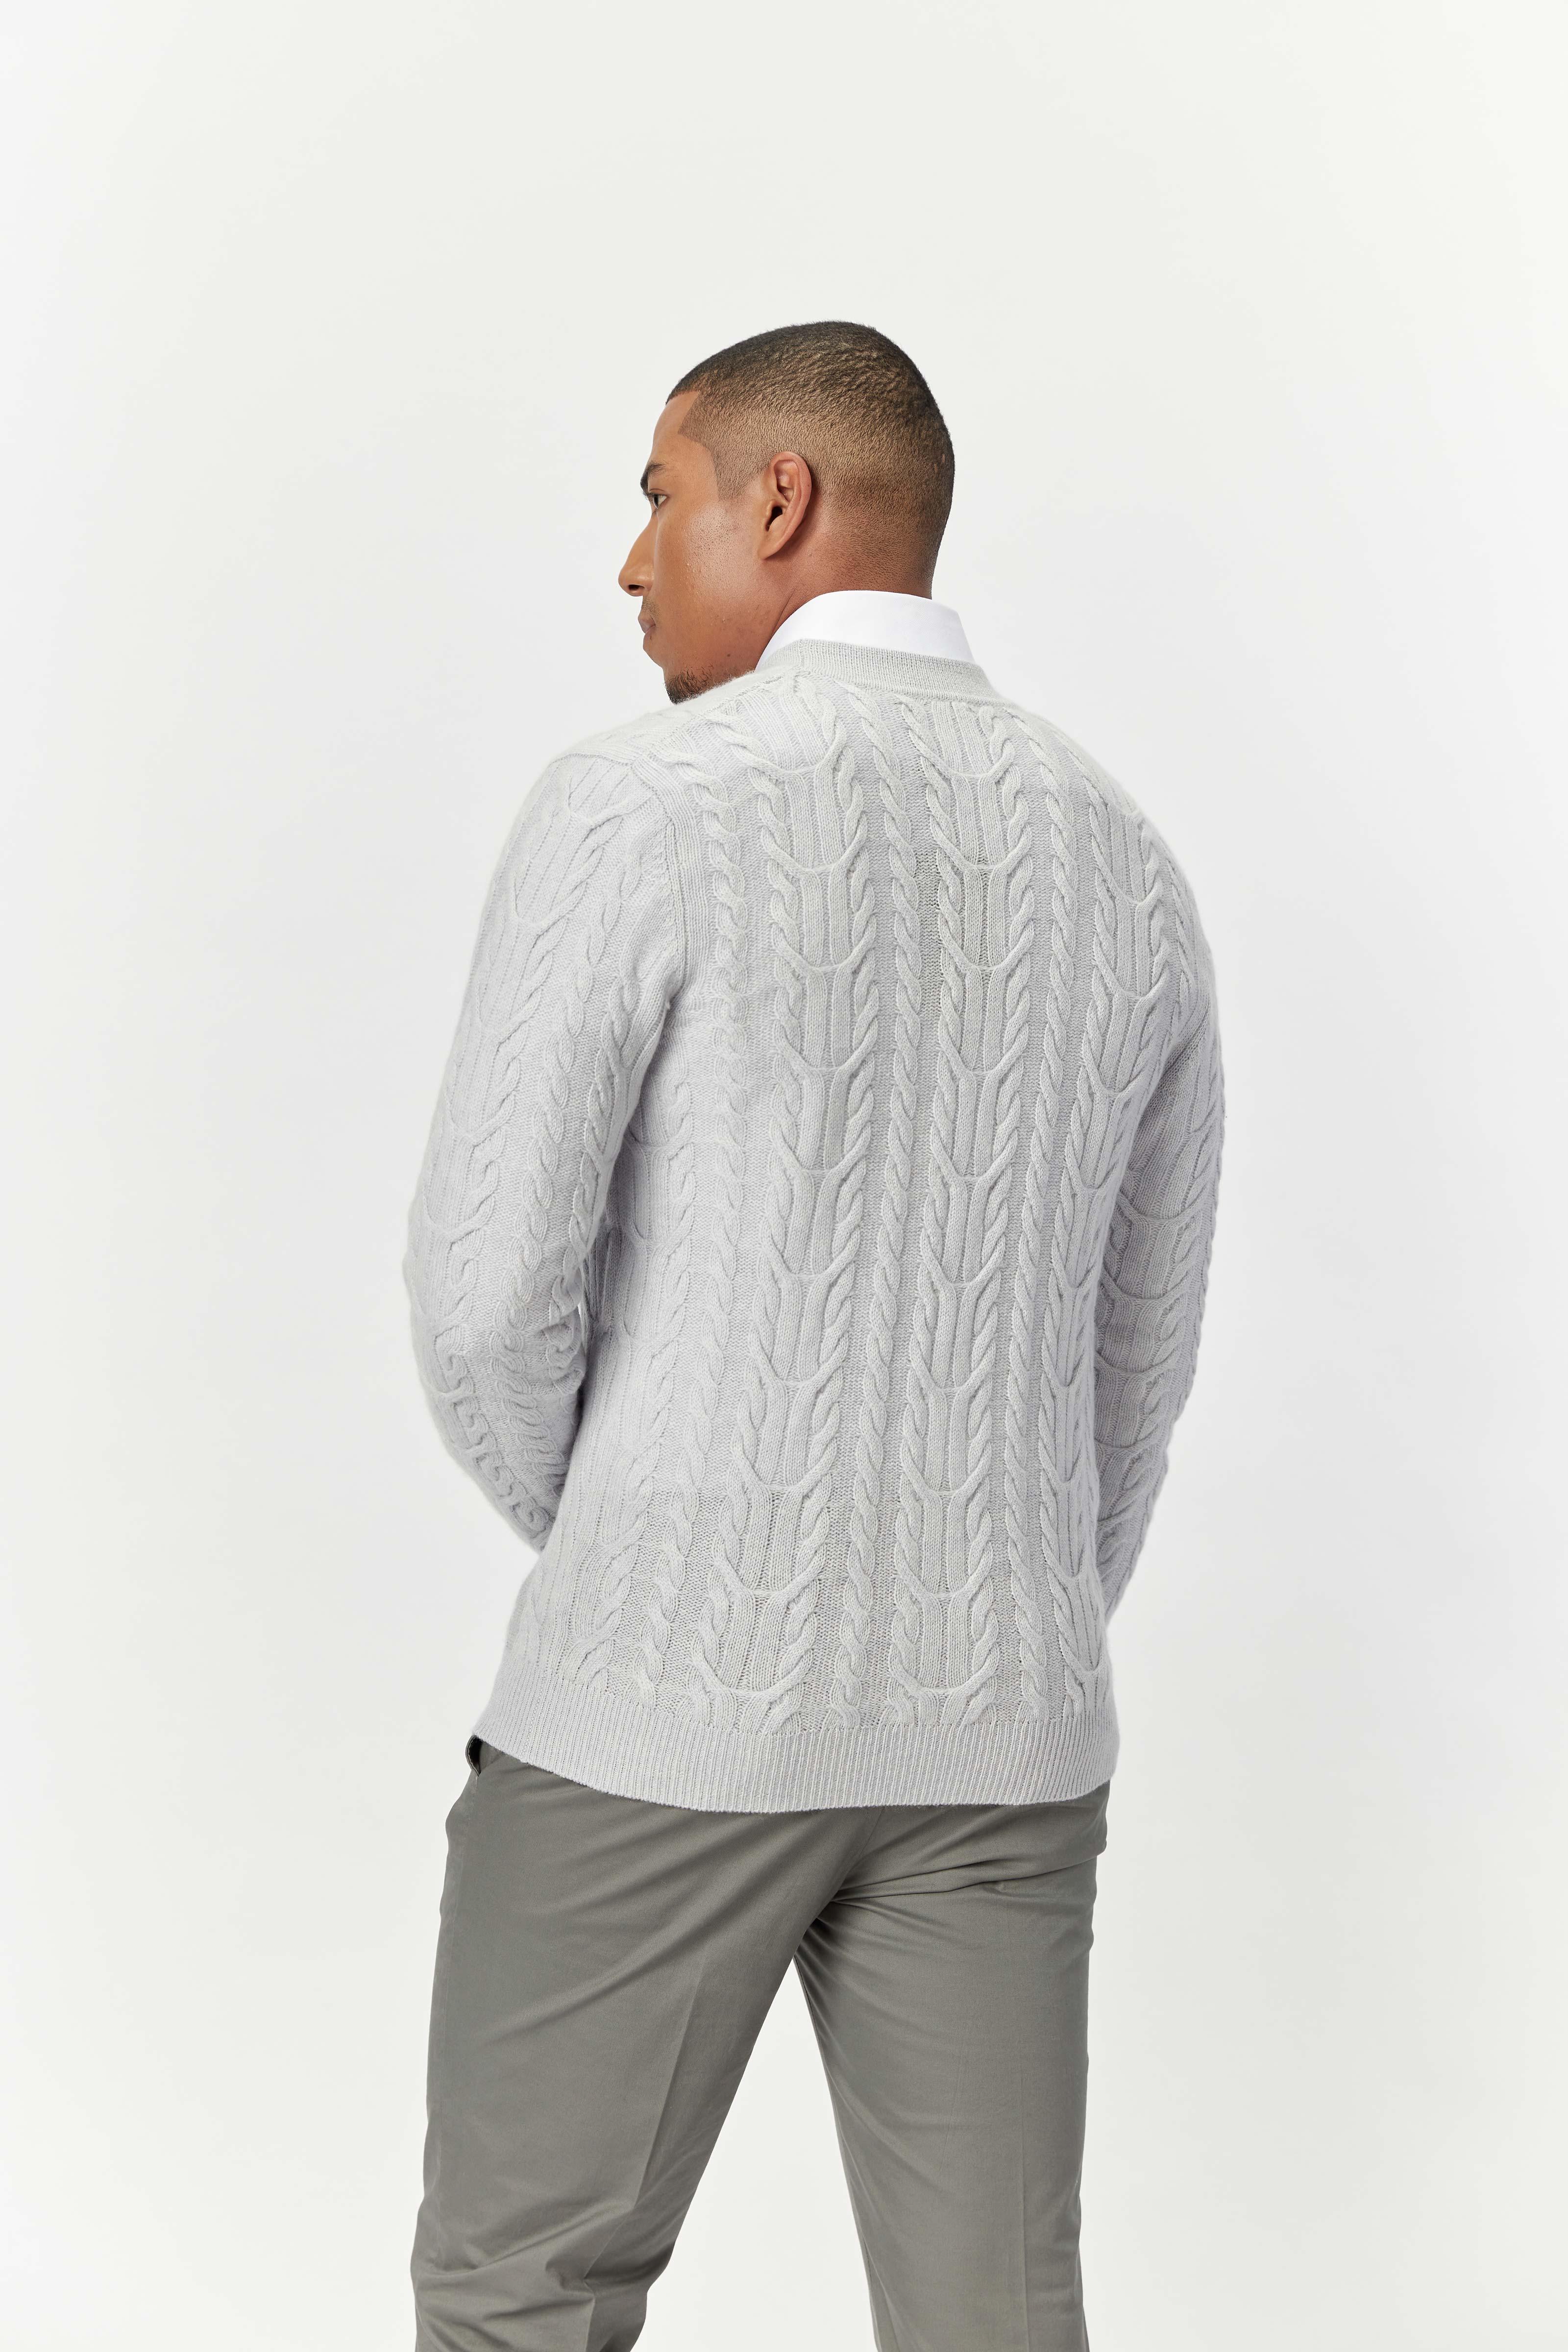 Gobi Cashmere Cashmere Cable Cardigan in Gray for Men - Lyst